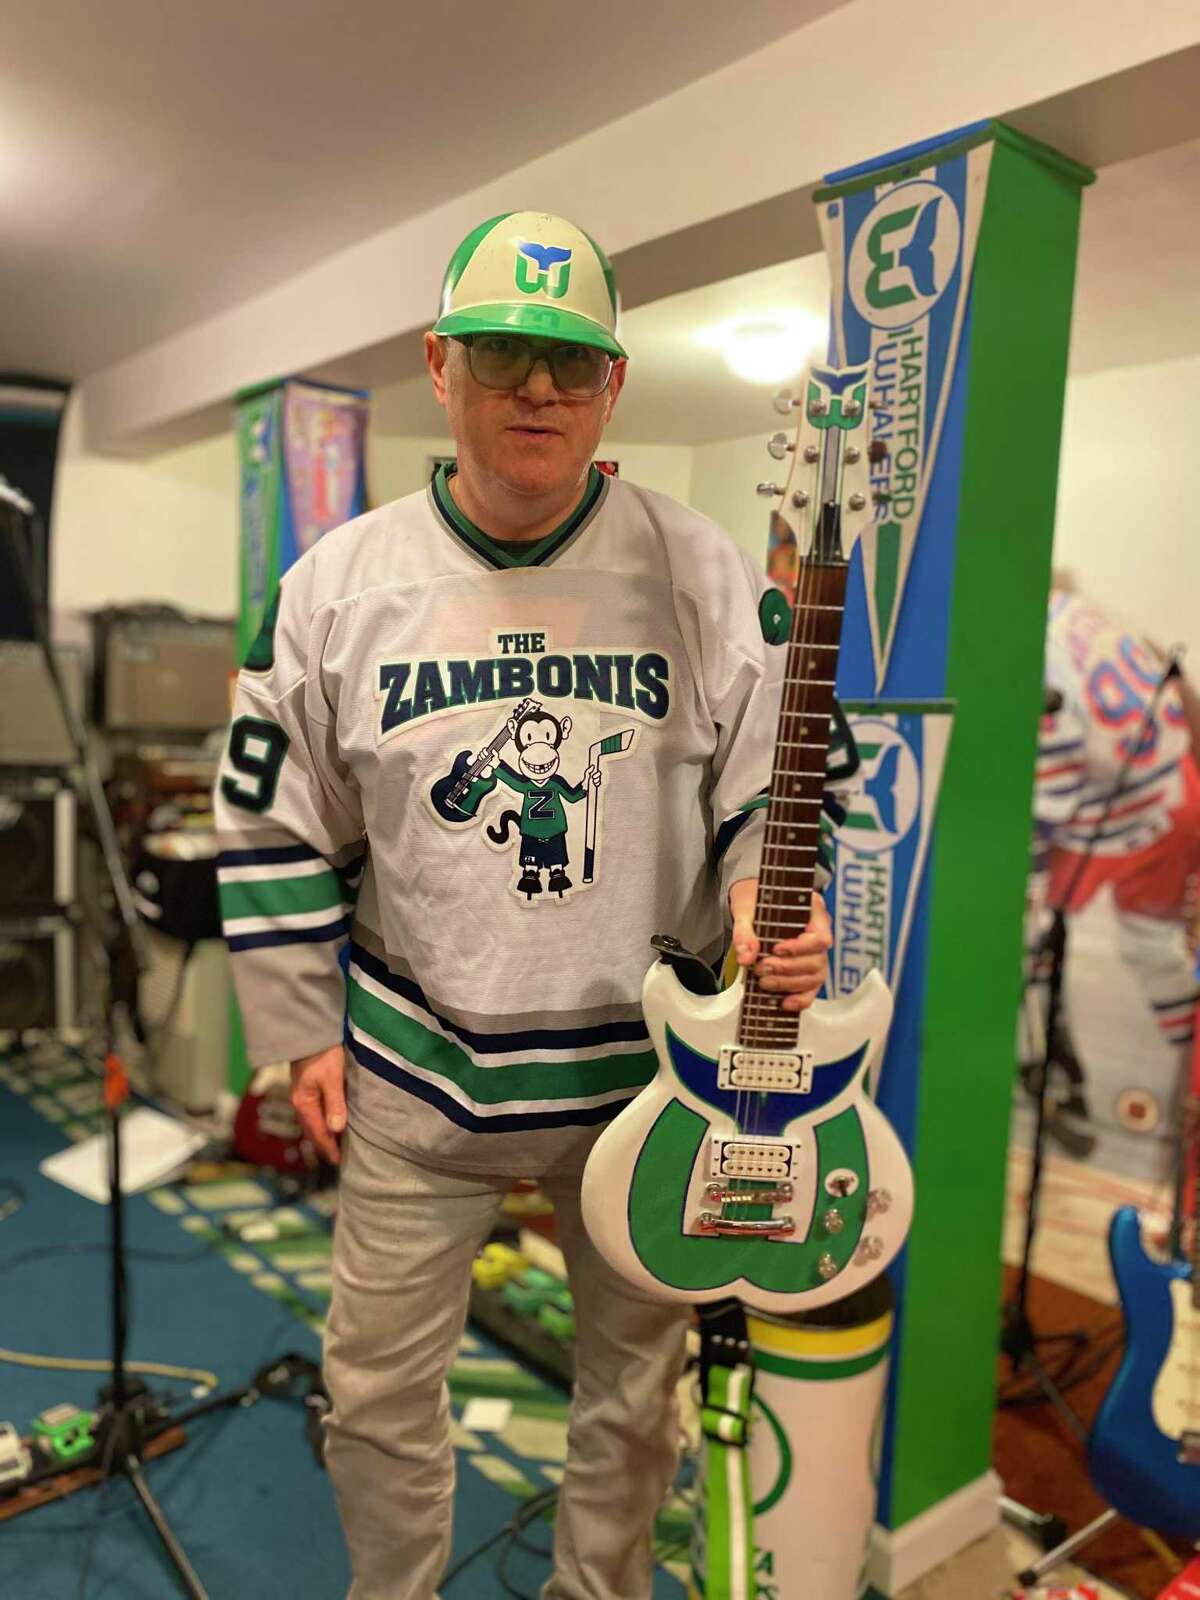 Dave Schneider is “defenseman, guitarist and singer” for the Connecticut-based hockey-rock band The Zambonis. Schneider, owner of Jimmy’s Army and Navy in downtown Bridgeport, created a Hartford Whalers Gibson guitar and wears Whalers gear at every gig.